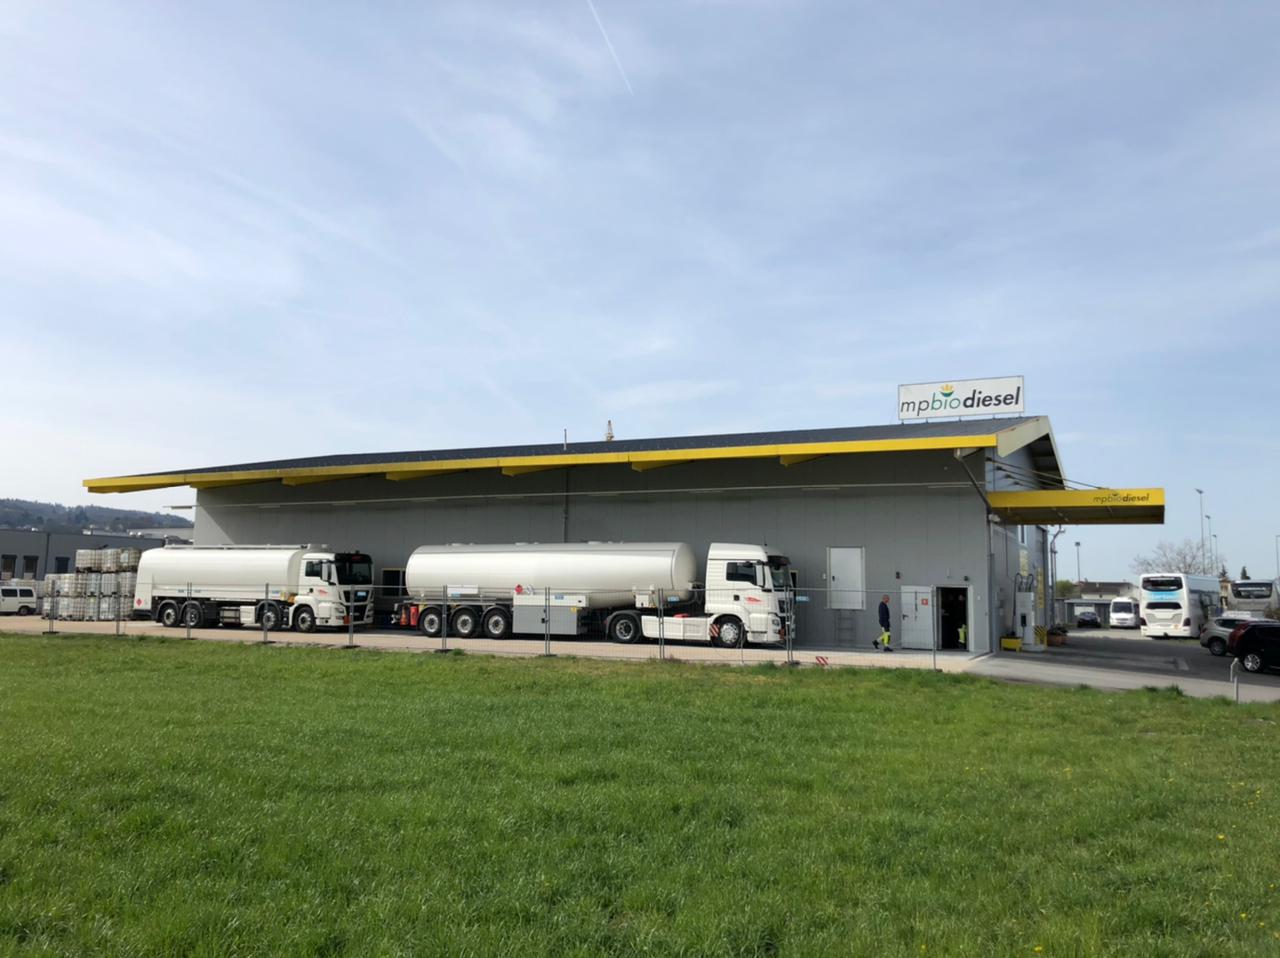 BSBIOS invests in the European renewable fuels market with acquisition of MP Biodiesel in Switzerland